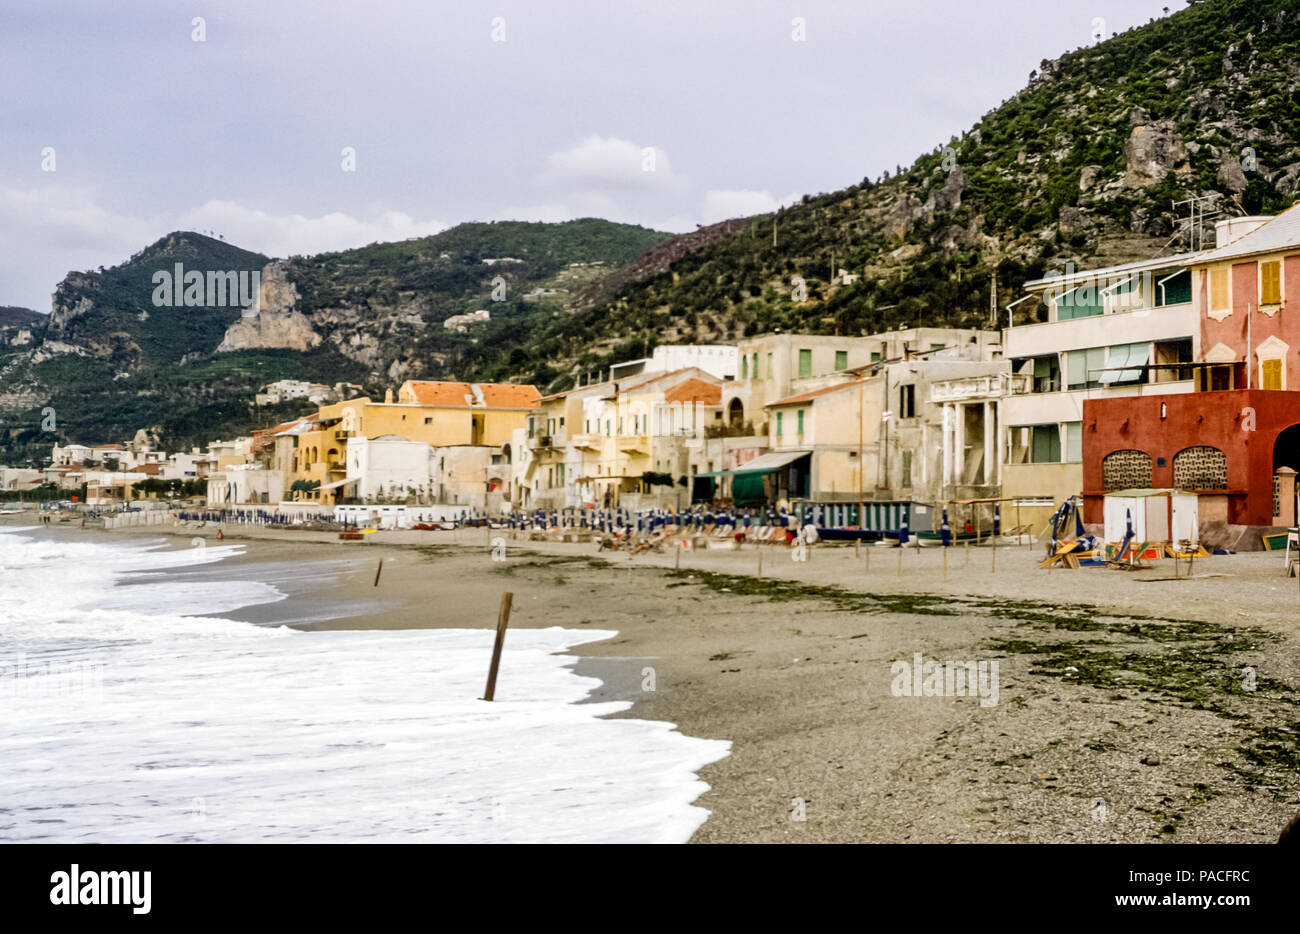 View of seaside buildings along the beach at Ventimiglia, Liguria, Northern Italy on the Italian riviera in the 1960s Stock Photo